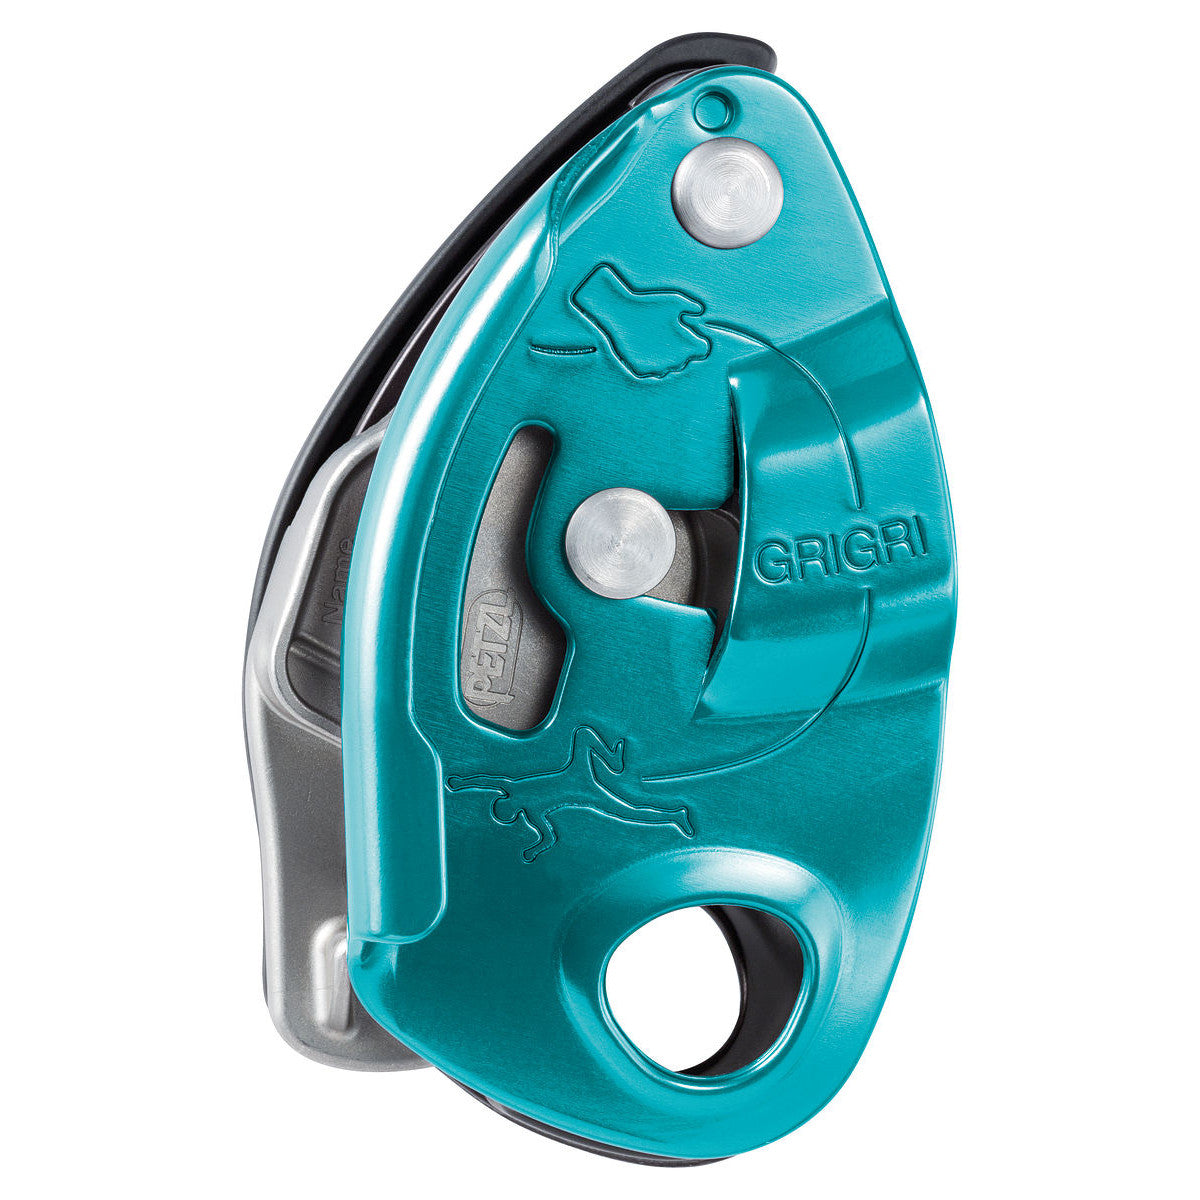 Petzl Grigri belay device, showing side view in Turquoise colour